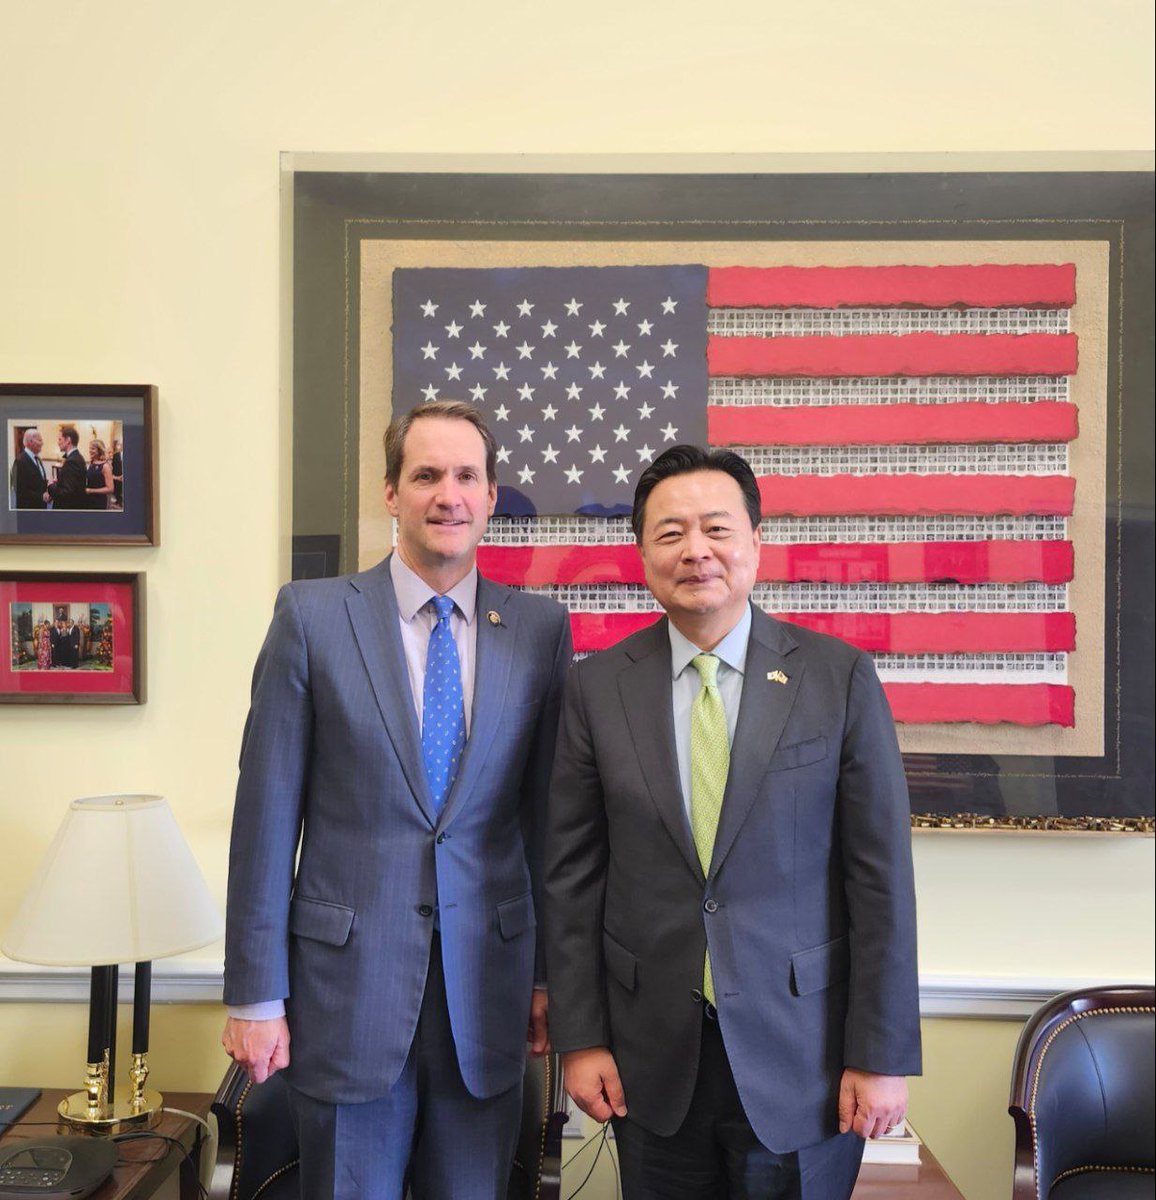 Amb. Cho had a pleasant meeting with House Intelligence Committee Ranking Member Rep. Jim Himes(@jahimes) from Conneticut and discussed how 🇰🇷🇺🇸 alliance is contributing to stability on the Korean Peninsula and beyond.